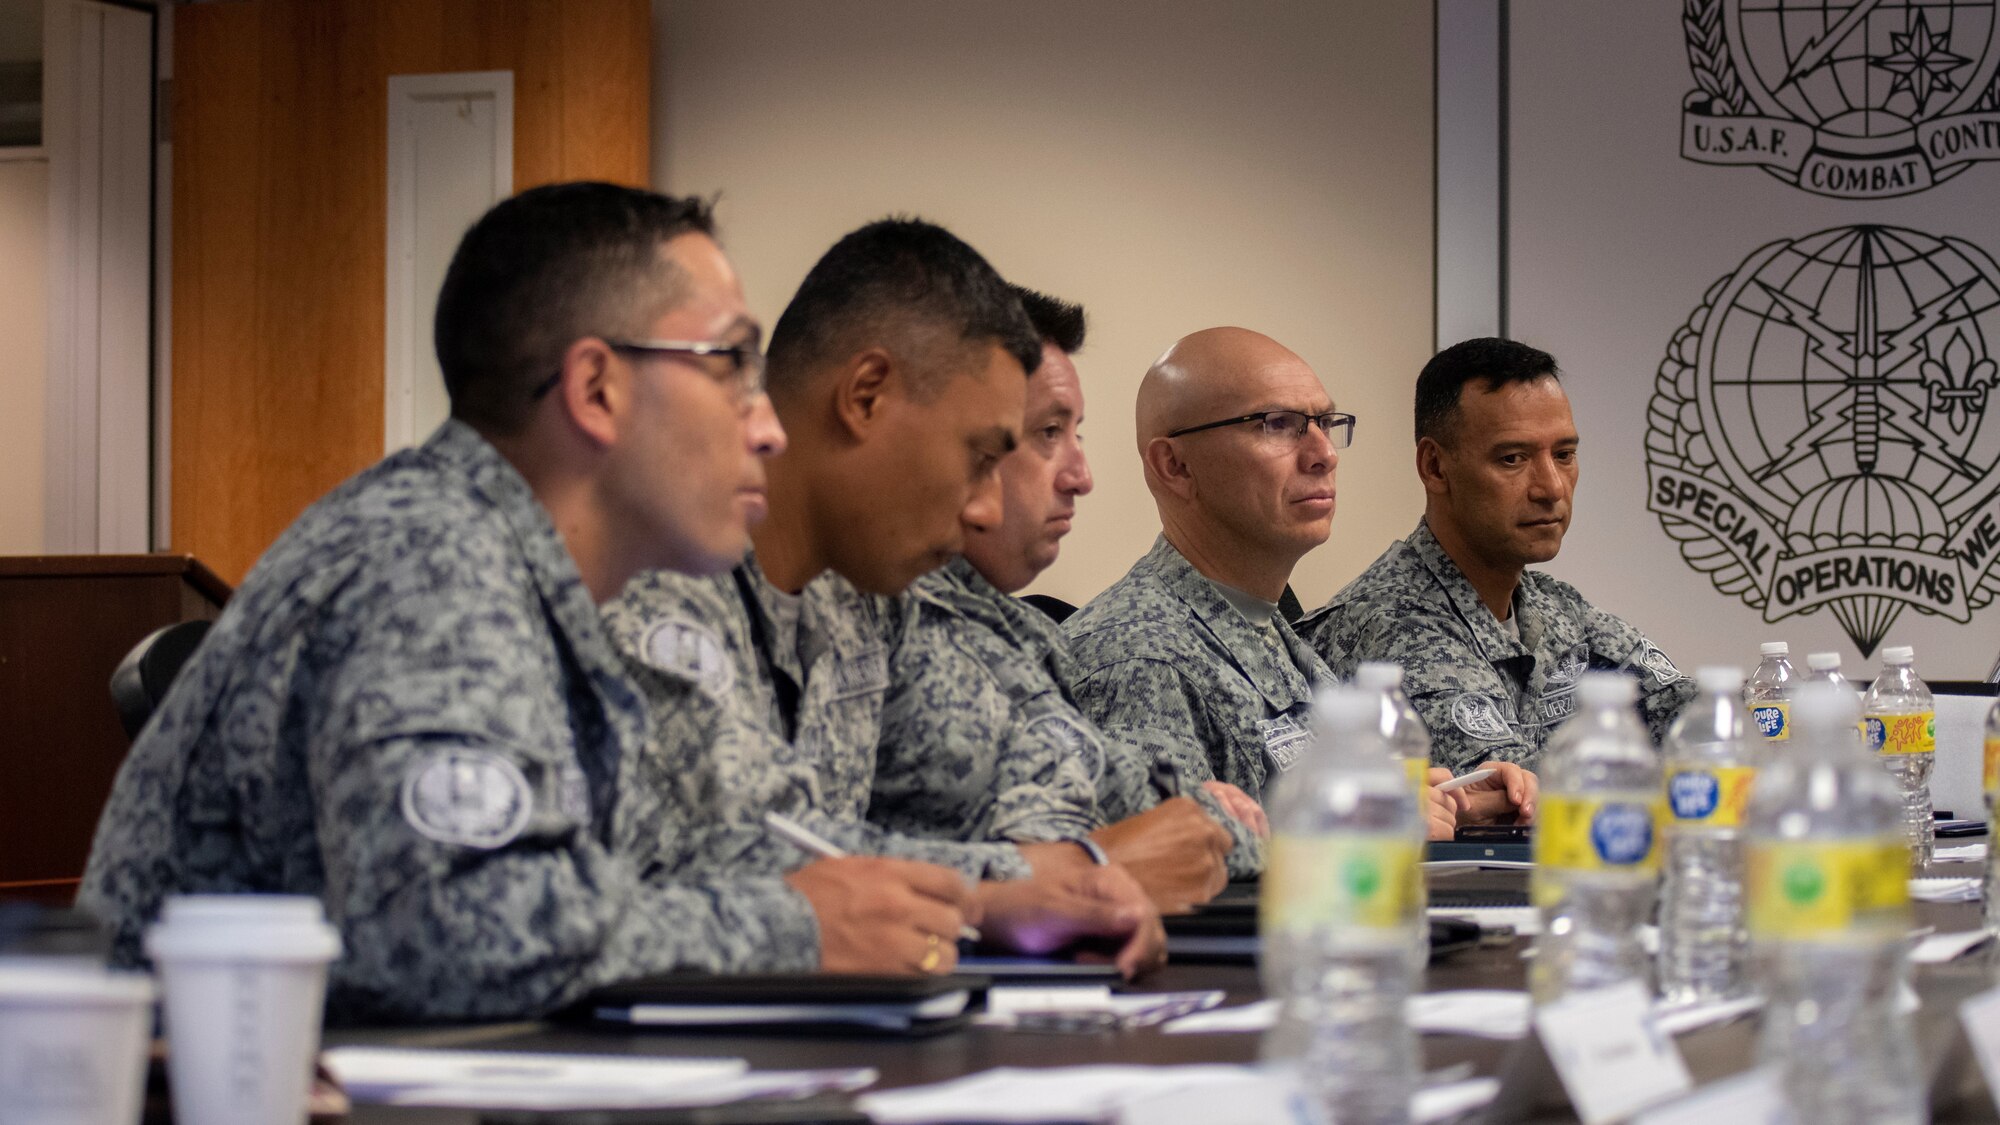 A delegation of Colombian Special Air Commands  leaders listen to a briefing on Air Force Special Warfare capabilities at Joint Base San Antonio-Chapman Training Annex, Texas, July. 25, 2022. The delegation visited the Special Warfare Training Wing for an immersion into the various Air Force Special Warfare career fields and pipelines.